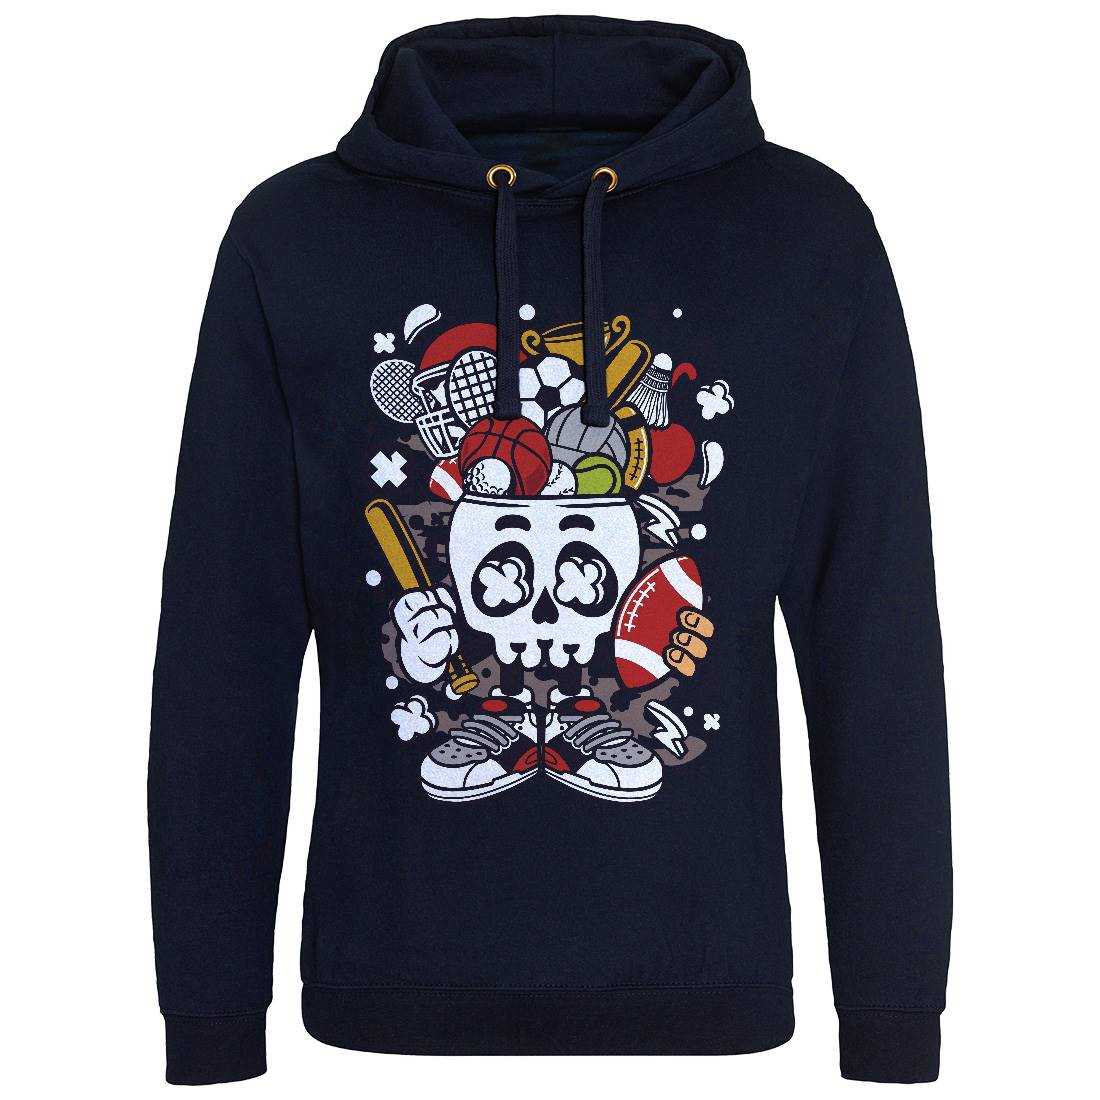 Sports Skull Head Mens Hoodie Without Pocket Sport C666